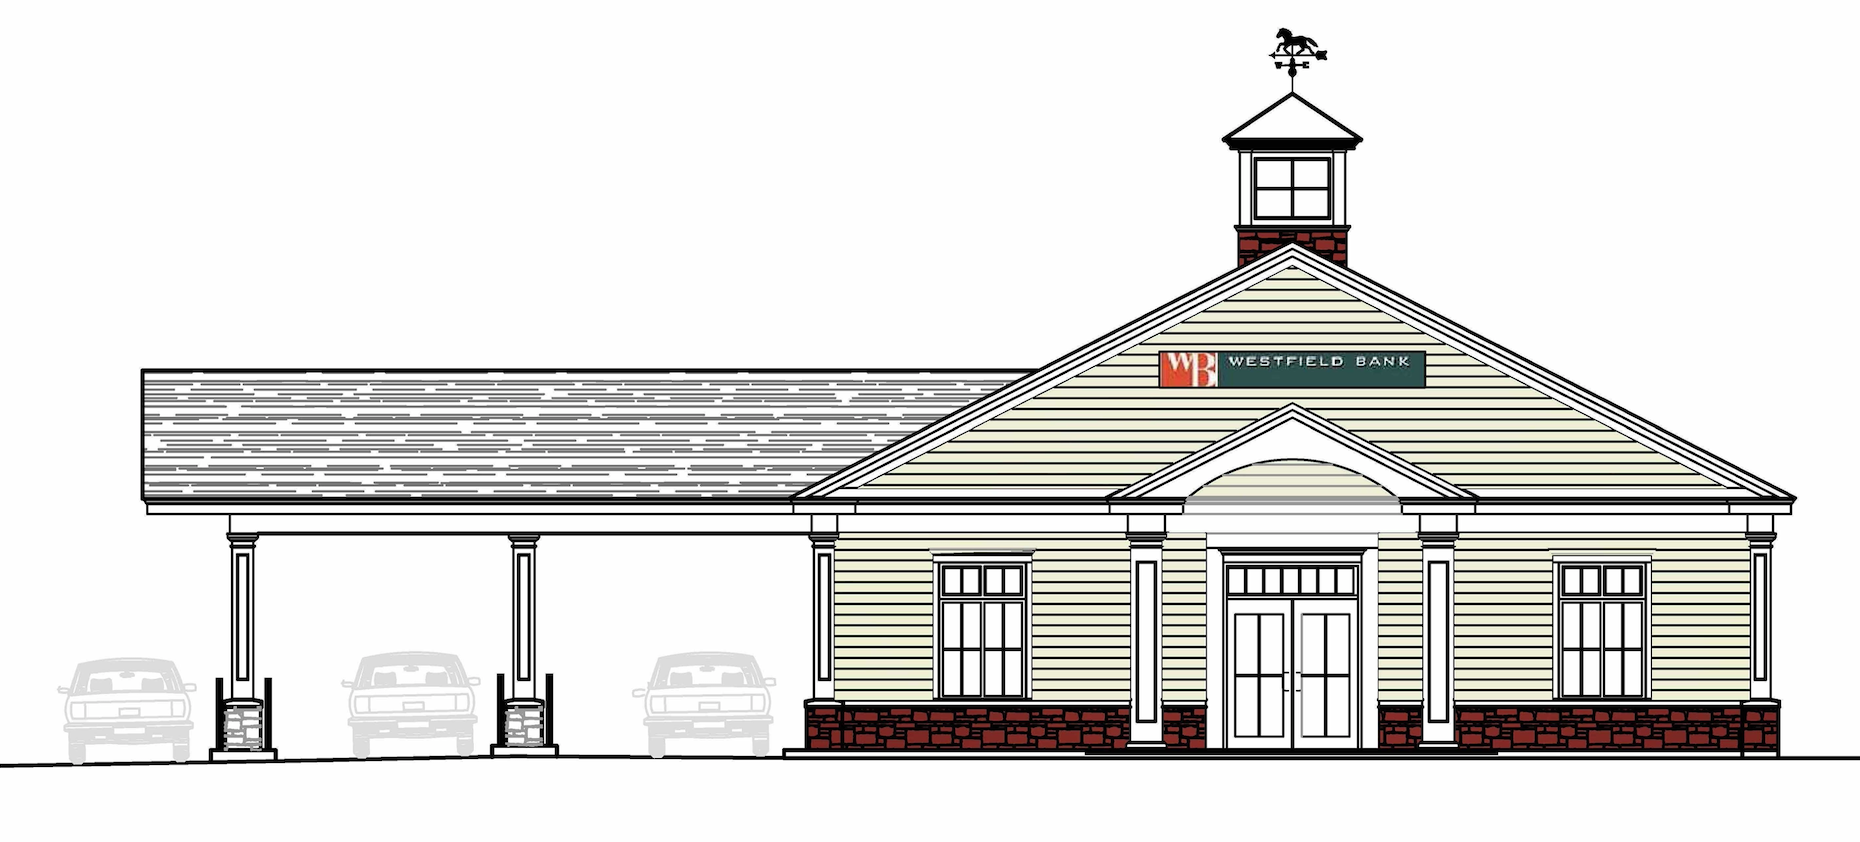 Westfield Bank Announces Plans to Build New Office in Granby, CT